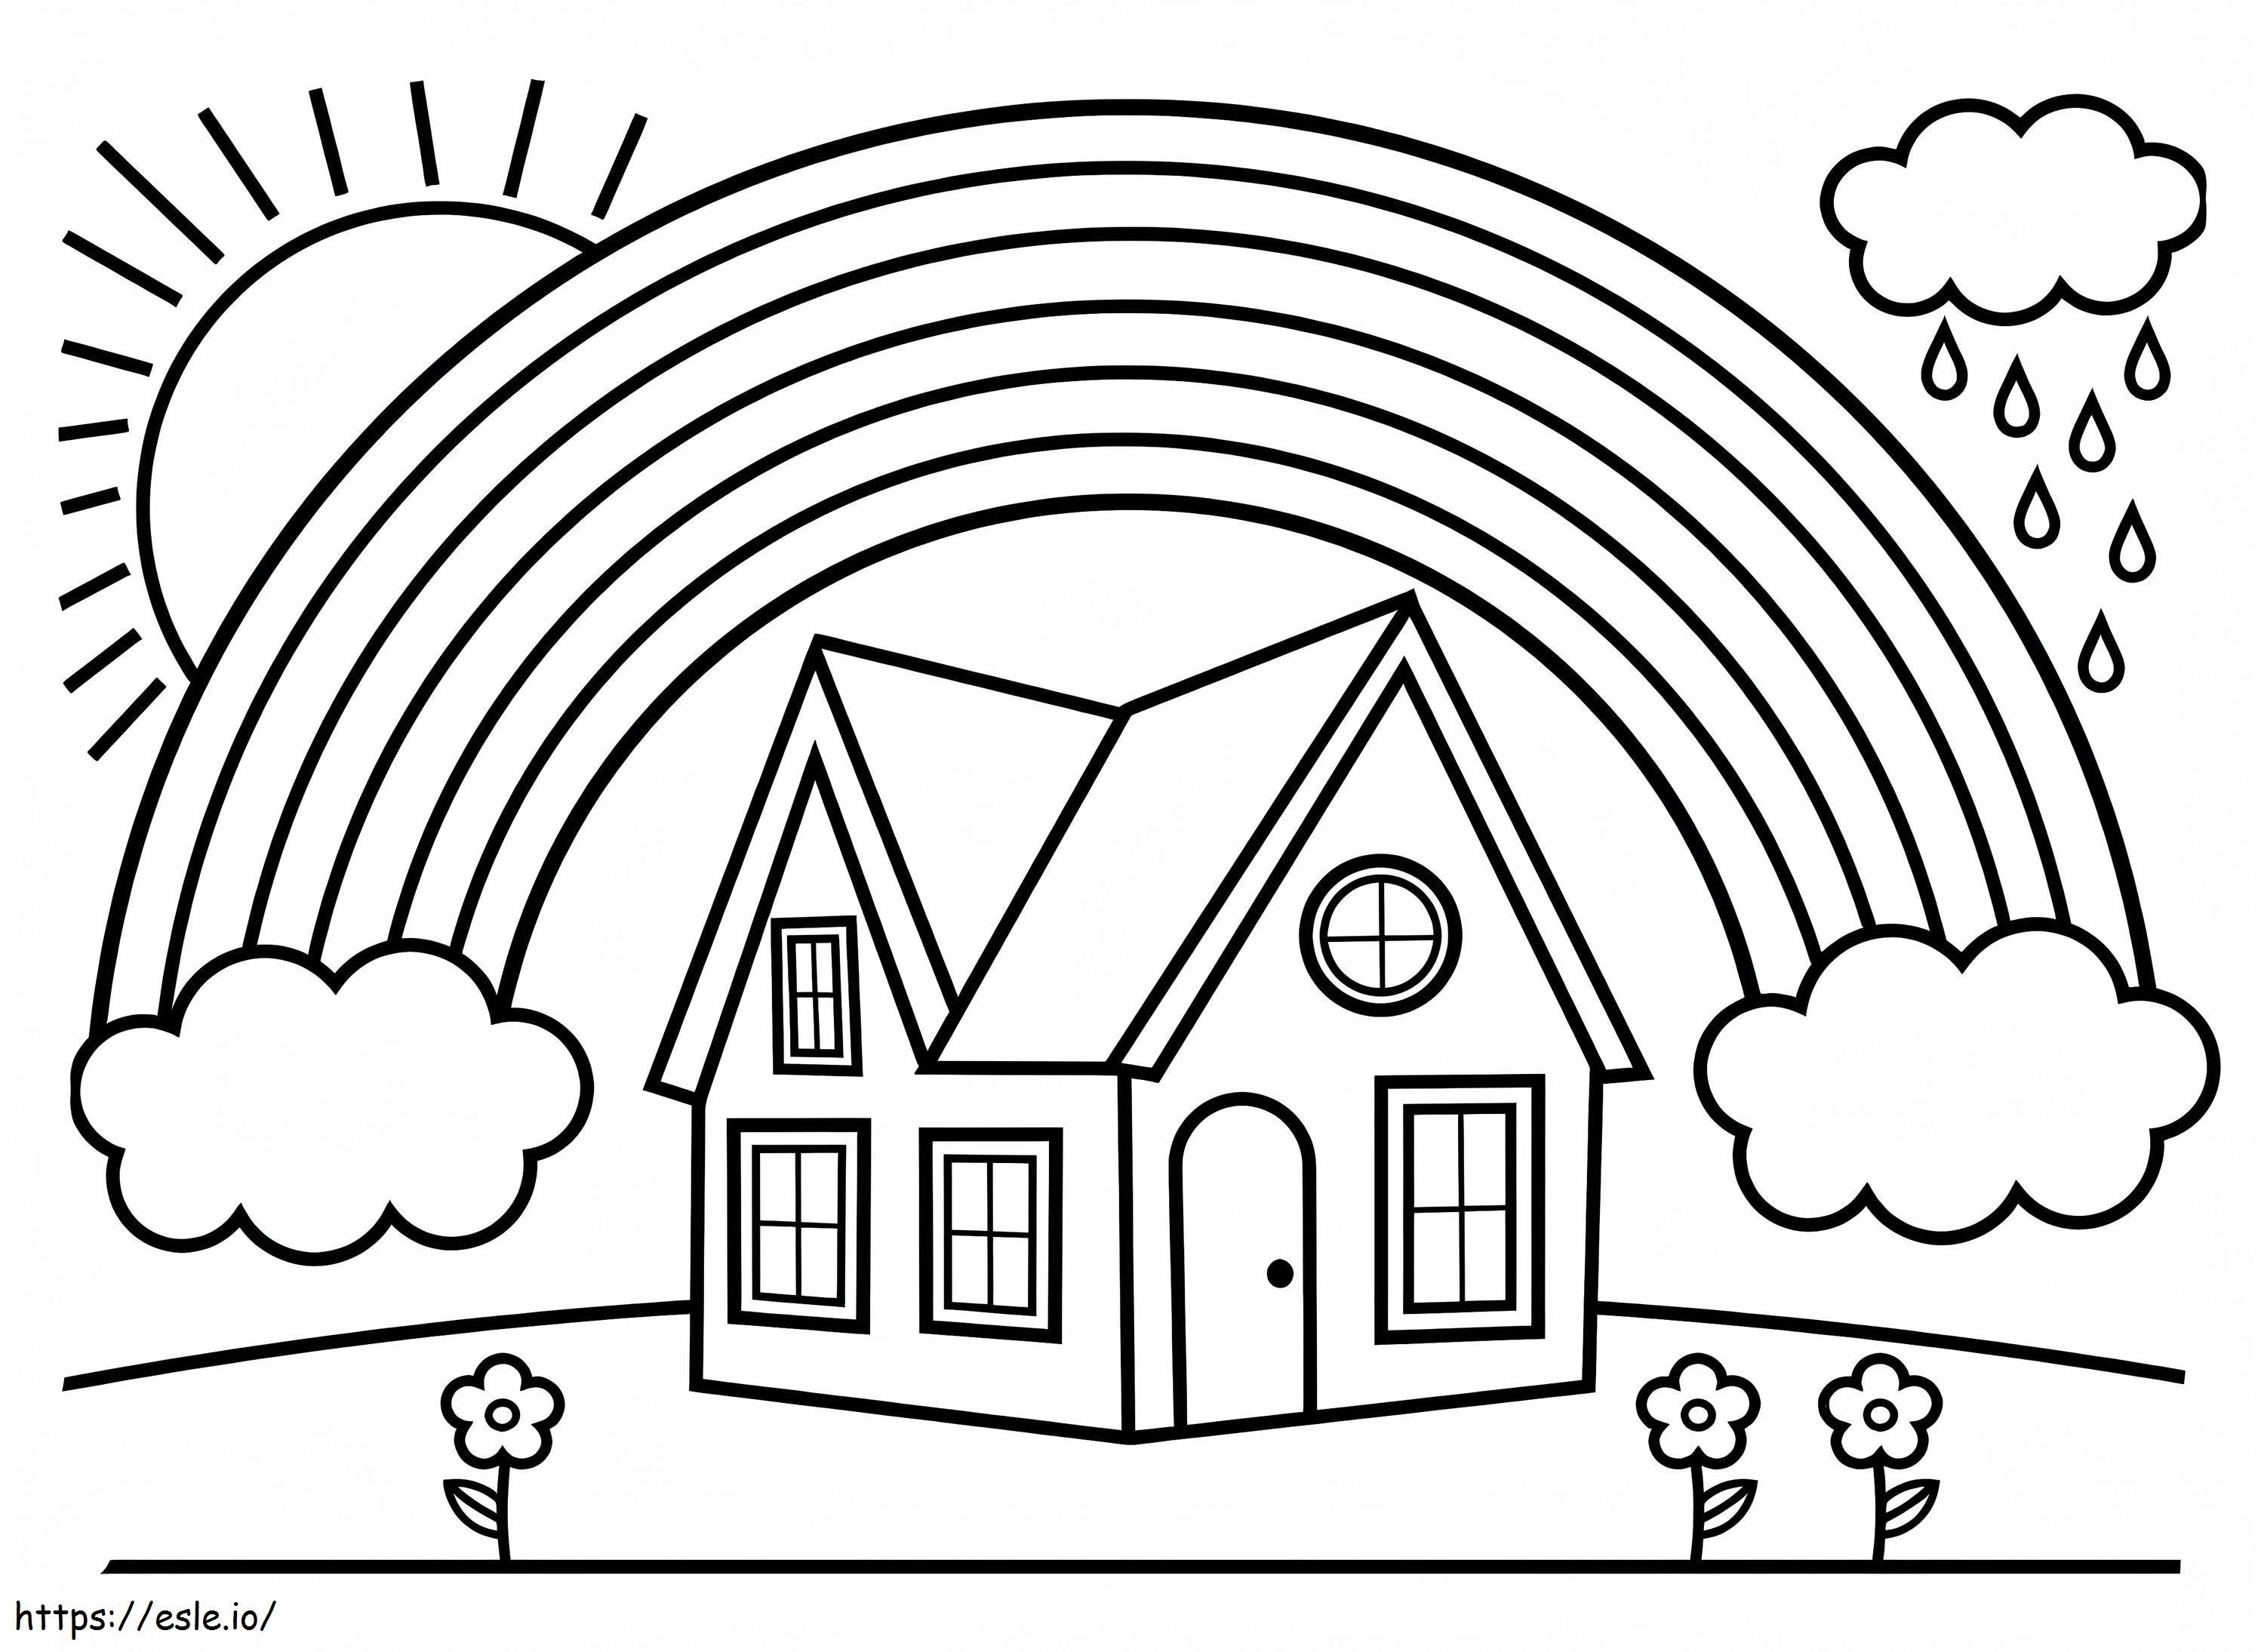 House And Rainbow Coloring Page coloring page